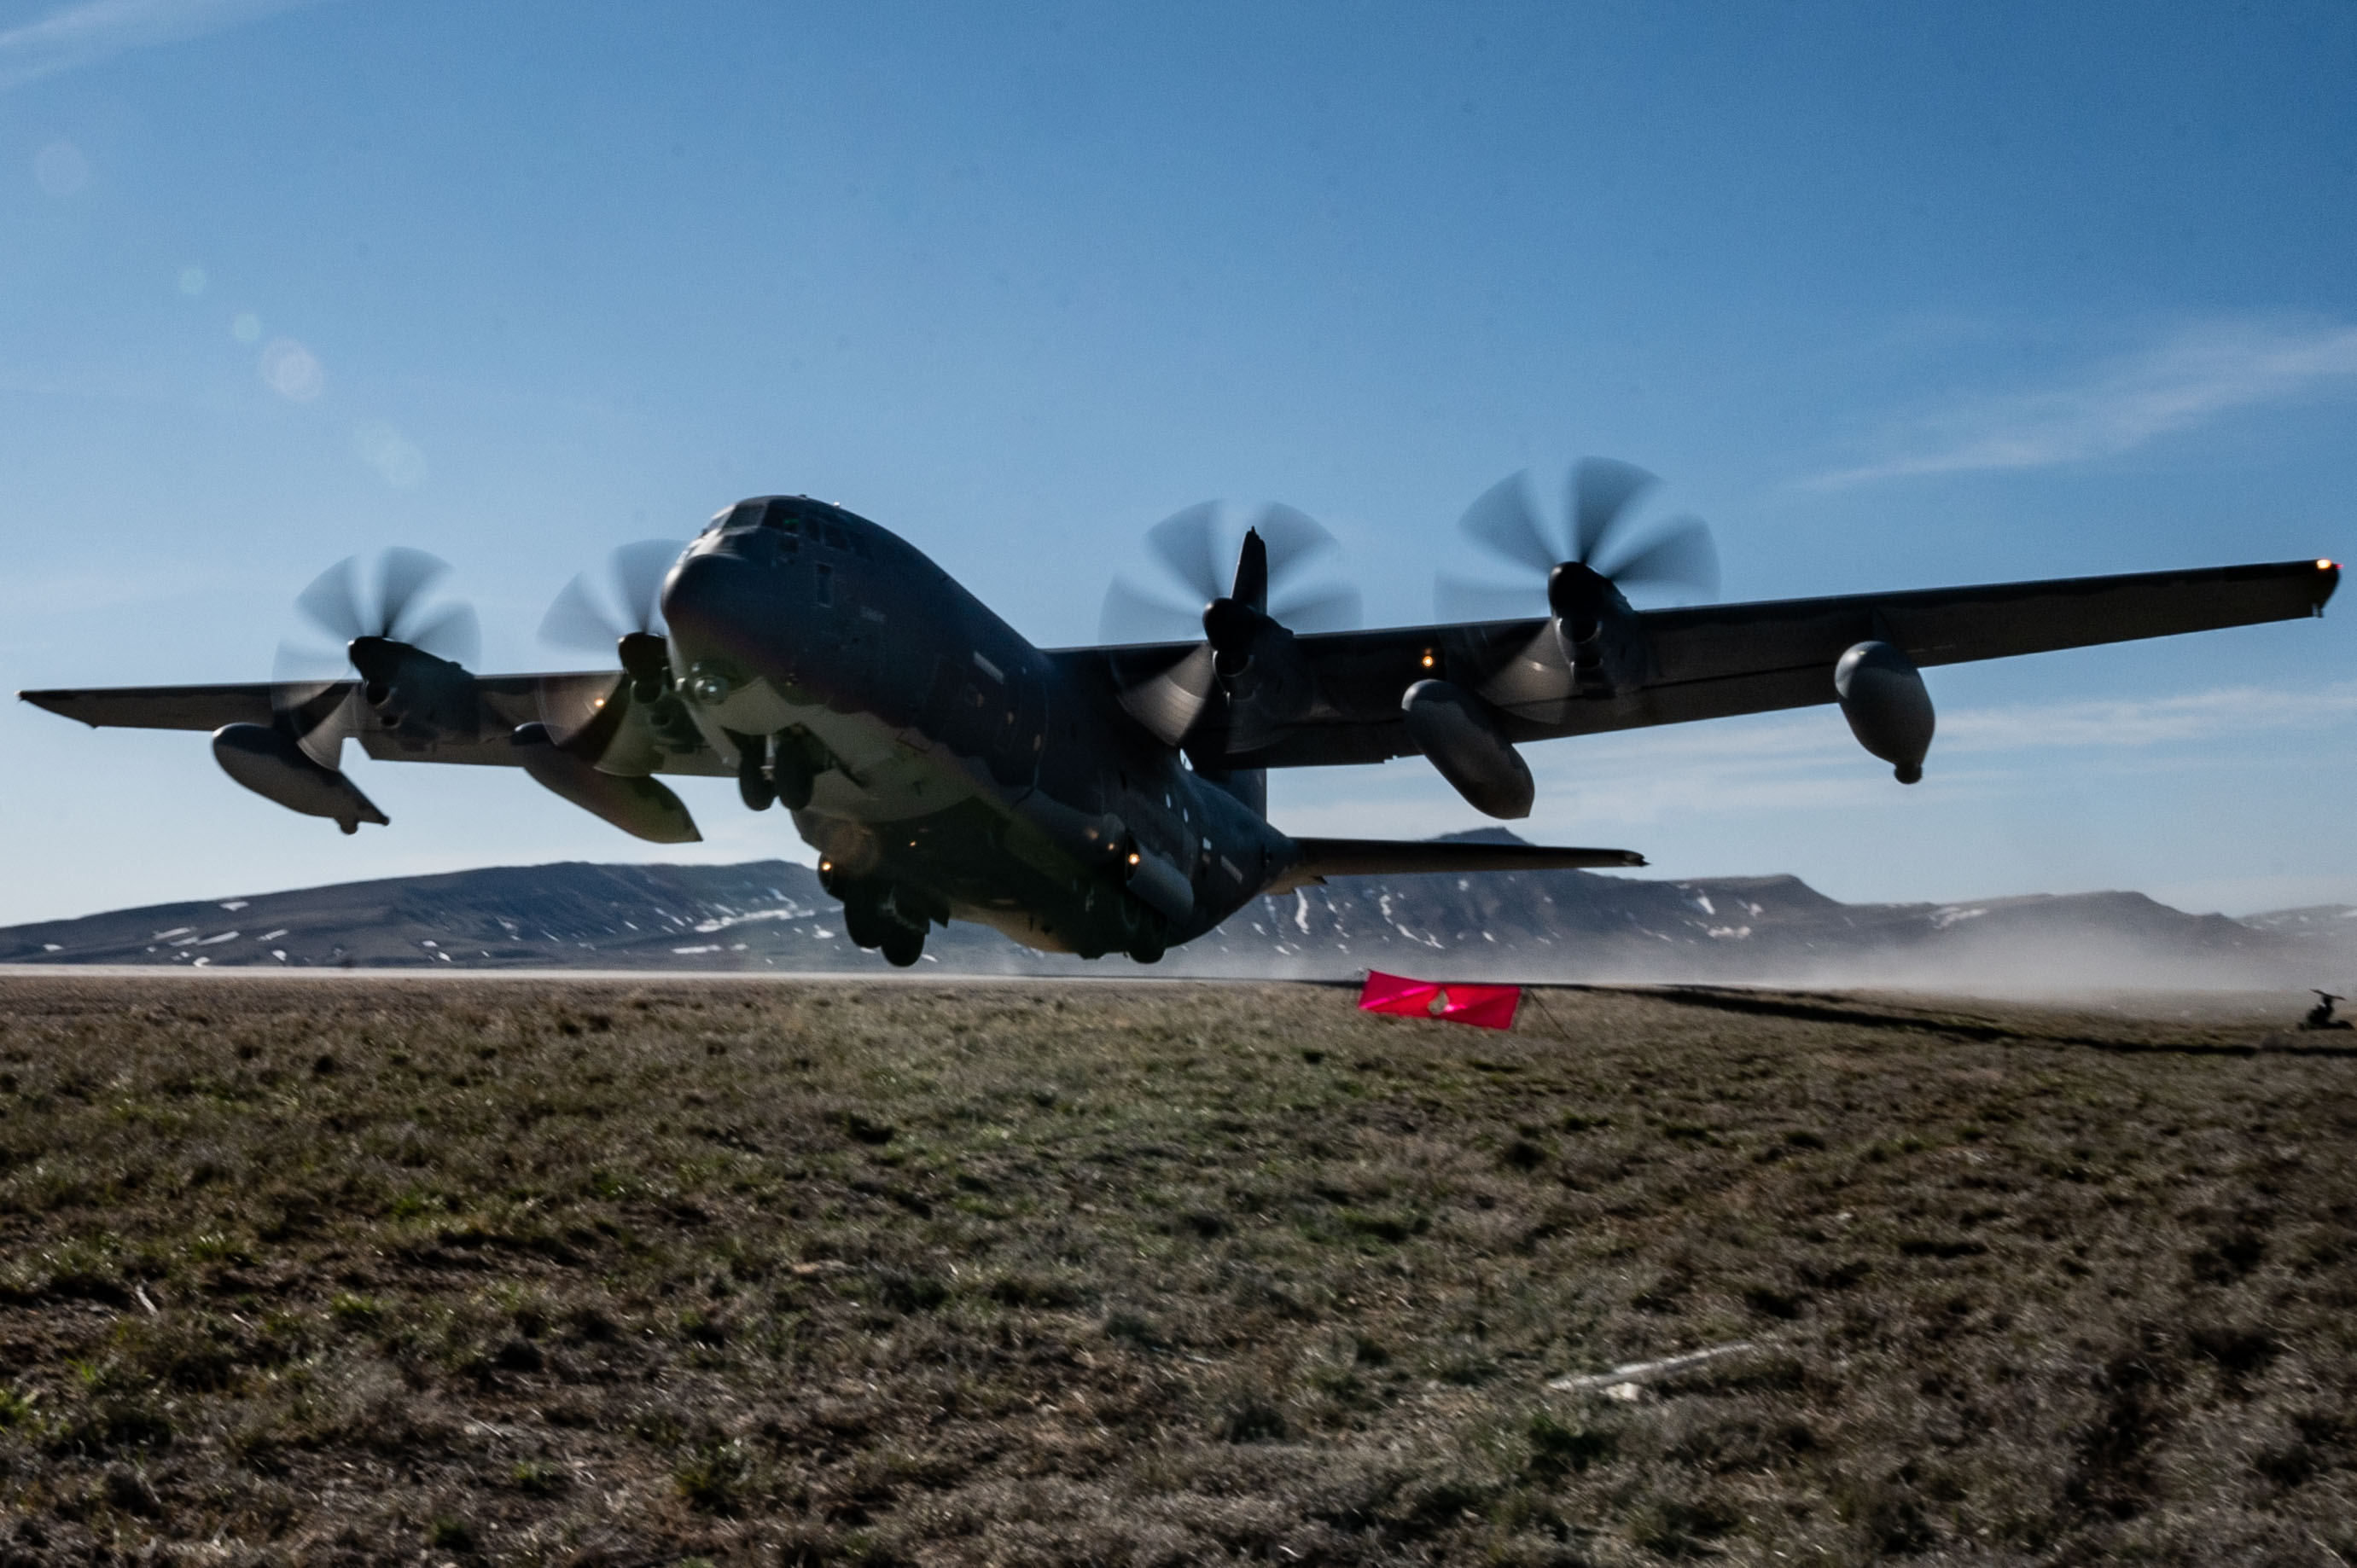 An MC-130J Commando II takes off of Highway 287 during Exercise Agile Chariot, April 30, 2023, honing capabilities linked to Agile Combat Employment. Instead of relying on large, fixed bases and infrastructure, ACE uses smaller, more dispersed locations and teams to rapidly move and support aircraft, pilots, and other personnel to wherever they are needed. There are millions of miles of public roads in the United States, including federal, state, and local roads – with Agile Combat Employment, including Forward Arming and Refueling Point (FARP) and Integrated Combat Turnarounds (ICT), it can become millions of miles of public runways, when necessary. (U.S. Air Force photo by Tech. Sgt. Carly Kavish)